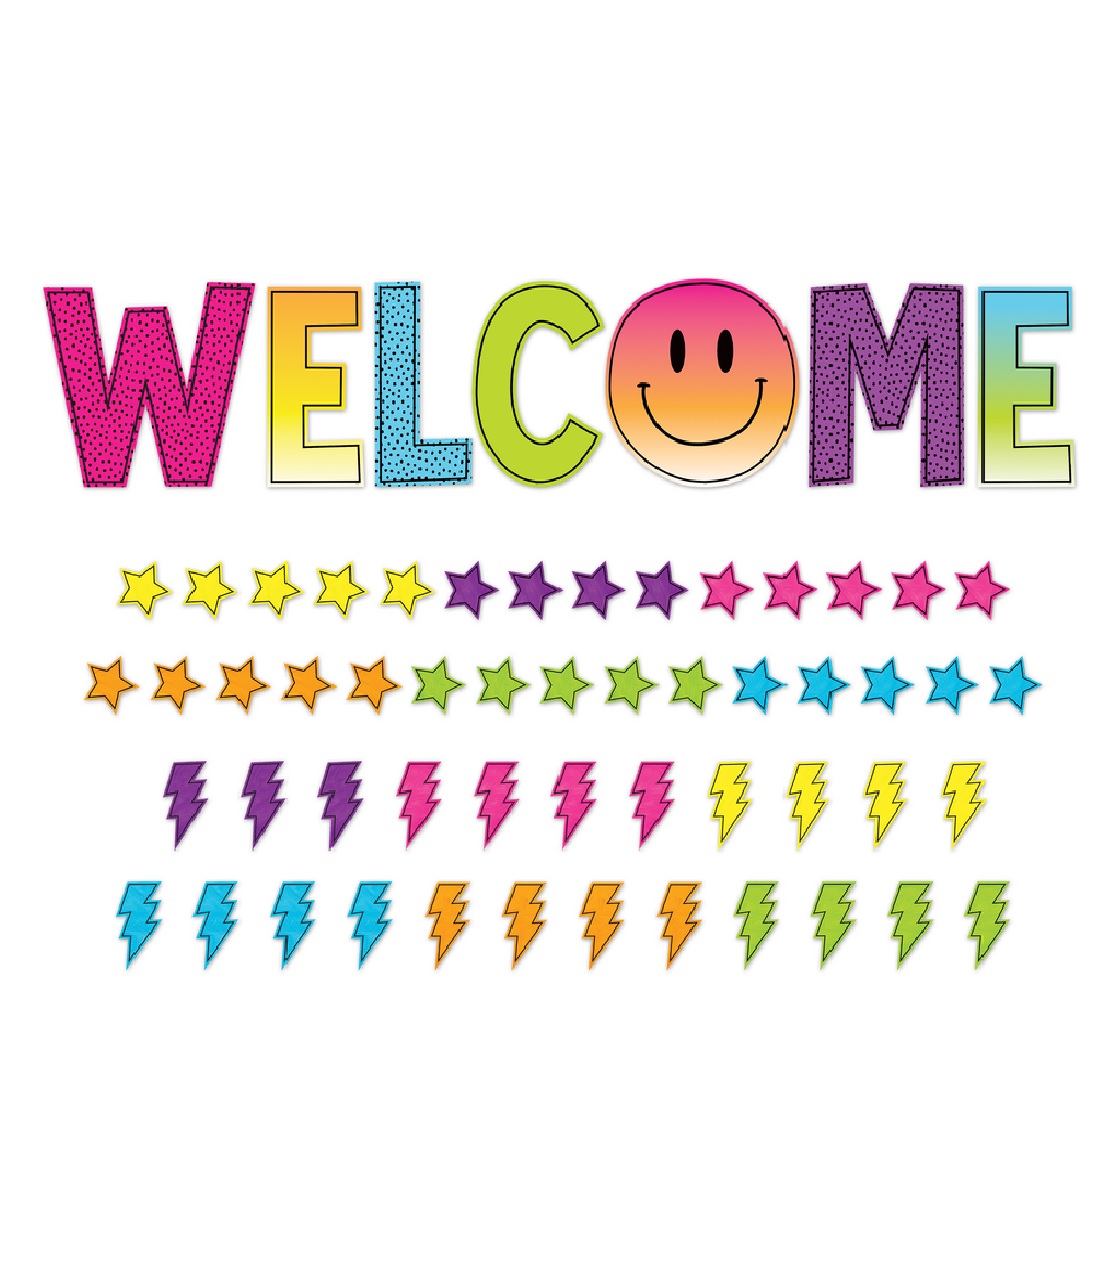 TCR-6920 Brights 4Ever Welcome Bulletin Board